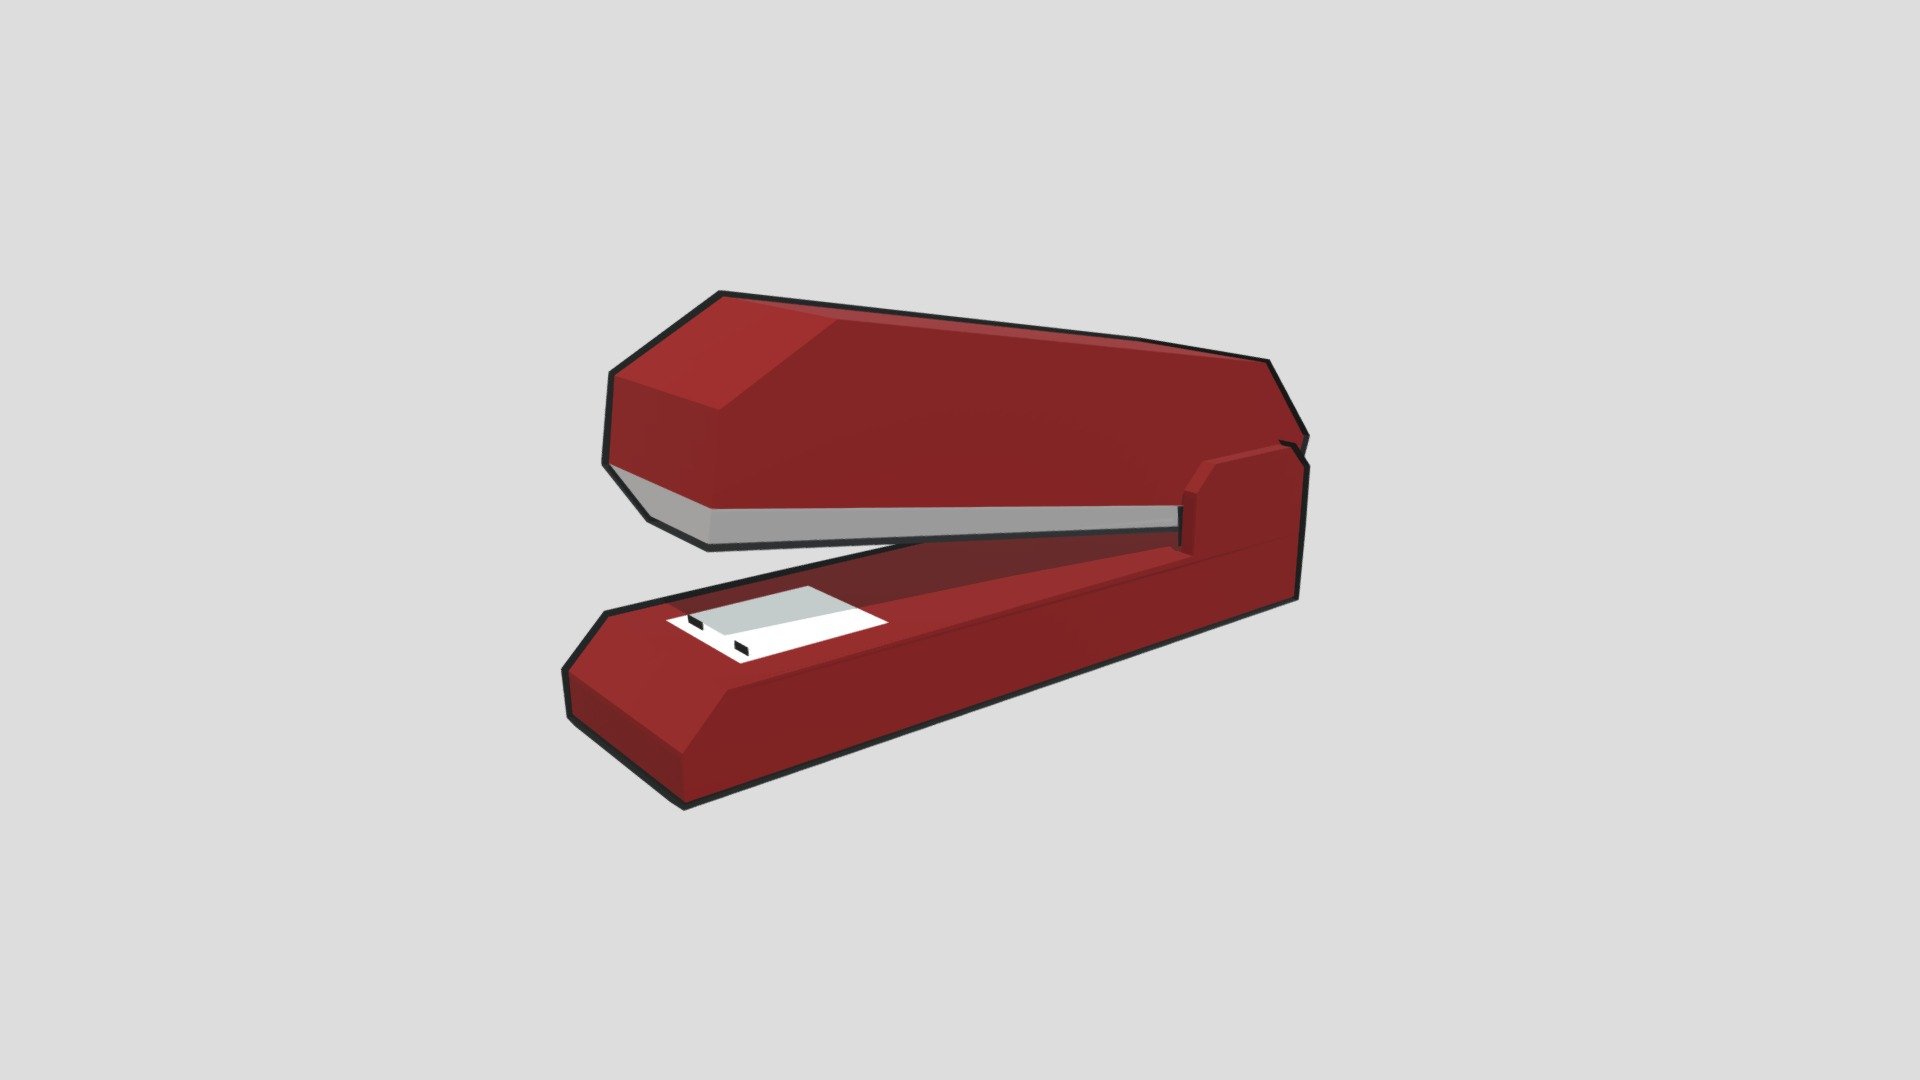 redoing and reposting one of my oldest models here. applying backface culling effect in this cartoon stapler 3d model